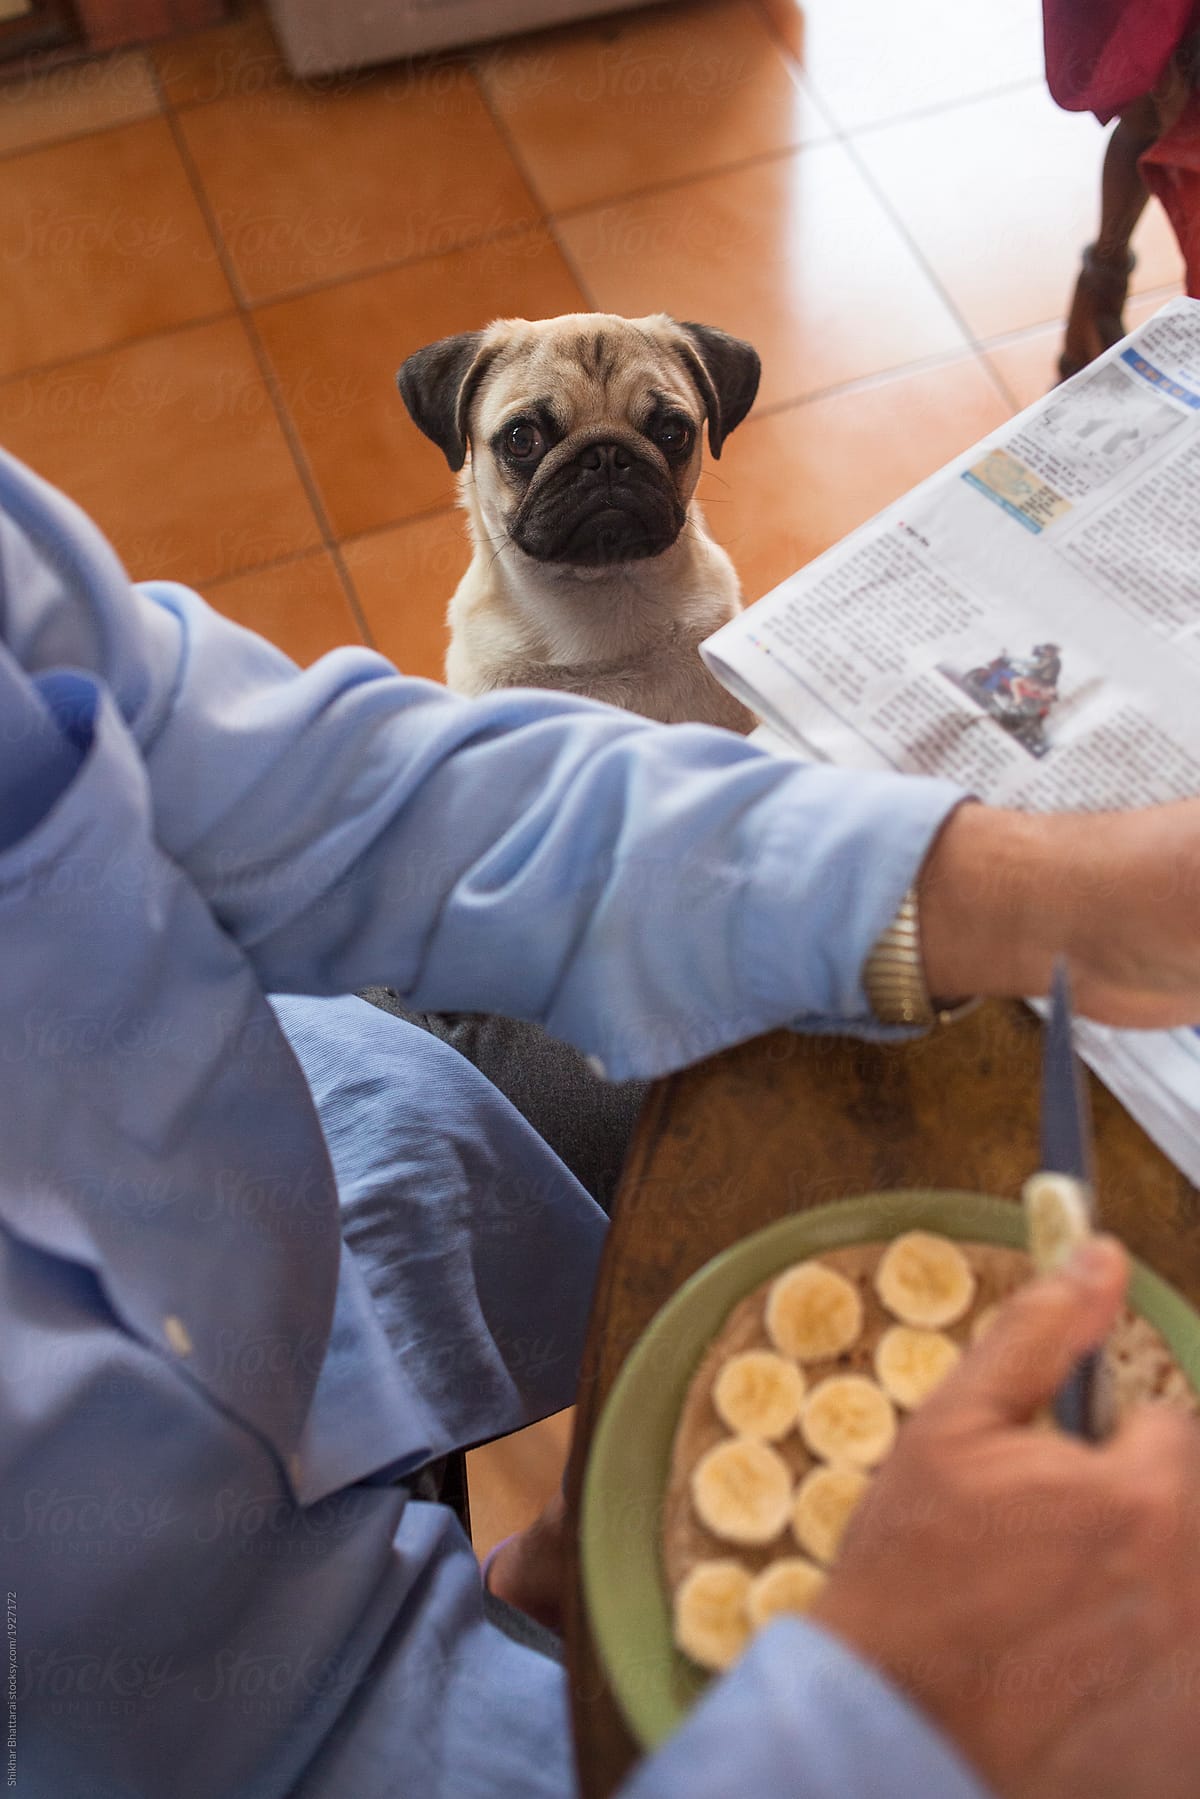 Bhunte, the naughty pug, begging for breakfast in a south asian household.